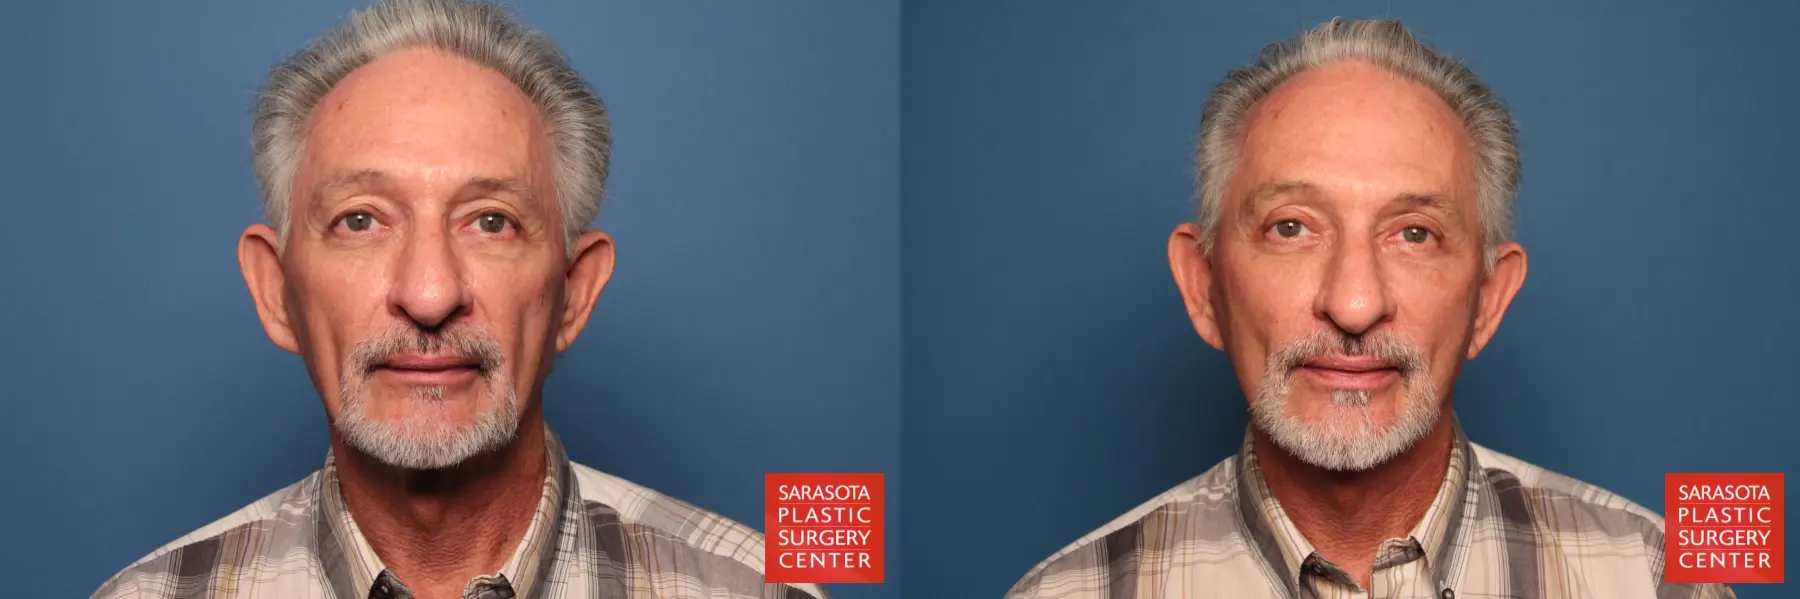 Facelift For Men: Patient 1 - Before and After 1